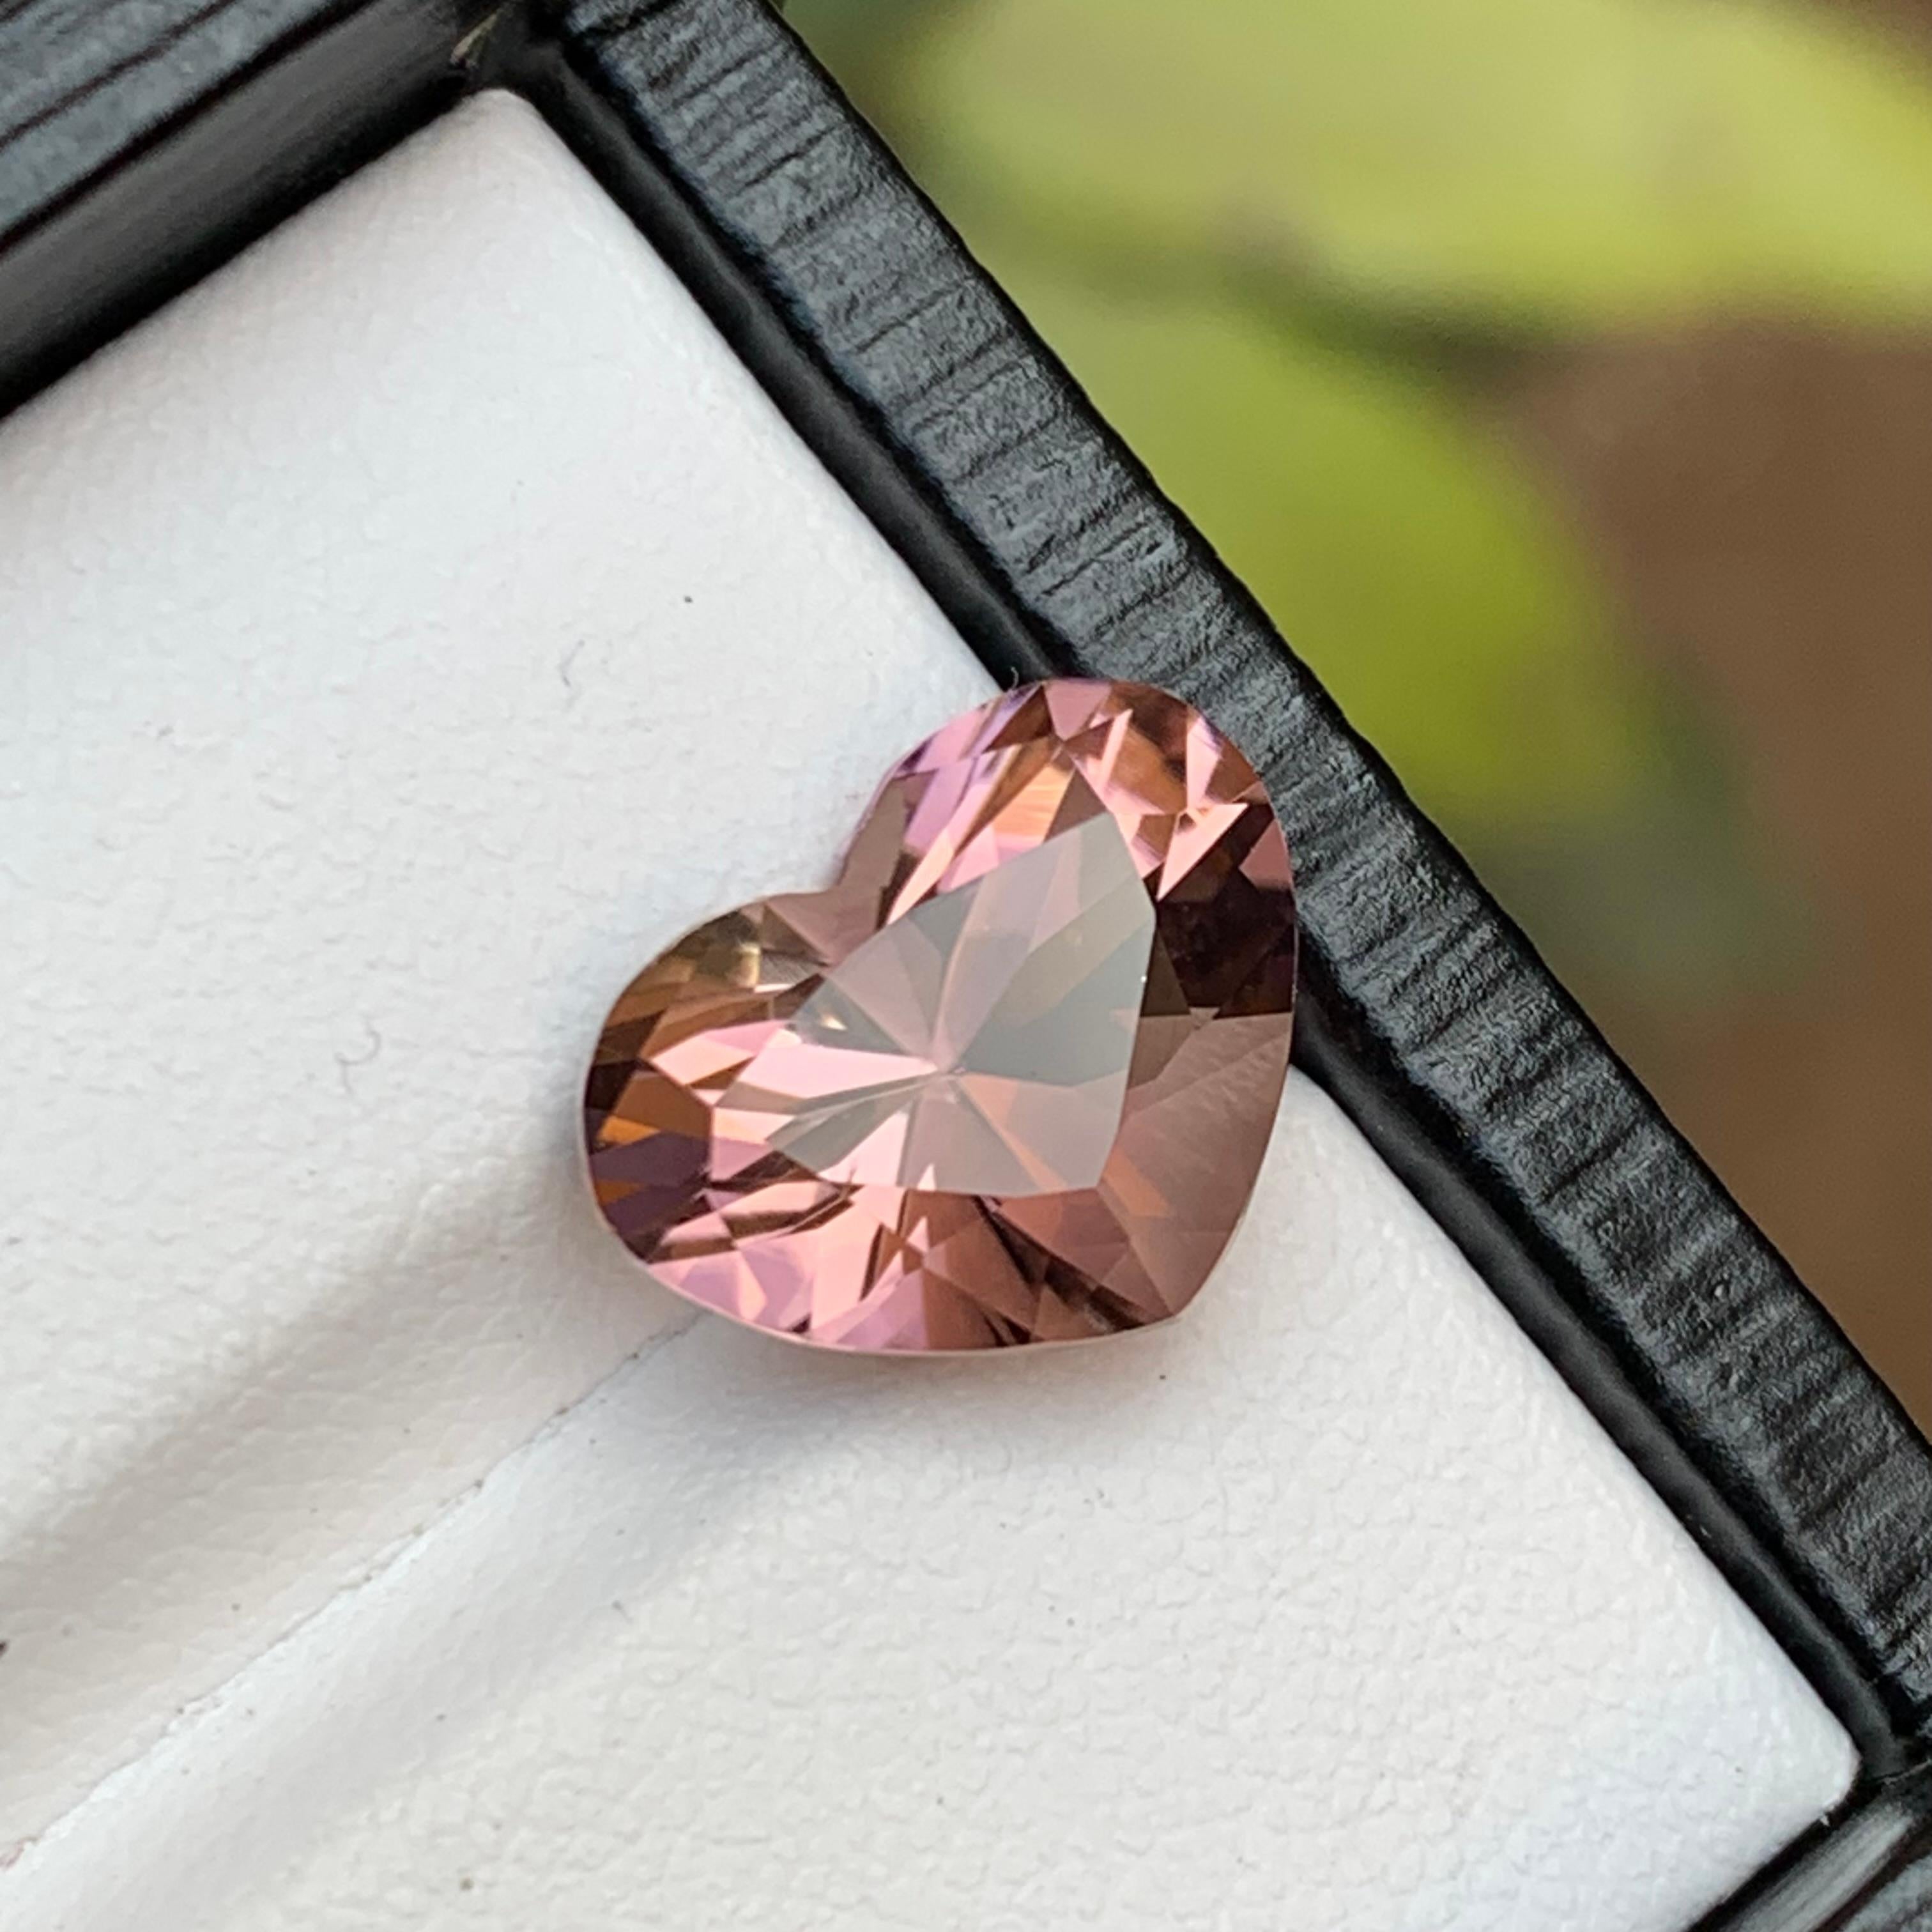 Gemstone Type: Tourmaline
Weight: 4.95 Carats
Dimensions: 9.75 x 12.70 x 7.72 mm
Color: Brownish Peach Pink
Clarity: Eye Clean
Treatment: Heated
Origin: Africa
Certificate: On demand 

his captivating heart-shaped tourmaline gemstone, mined in